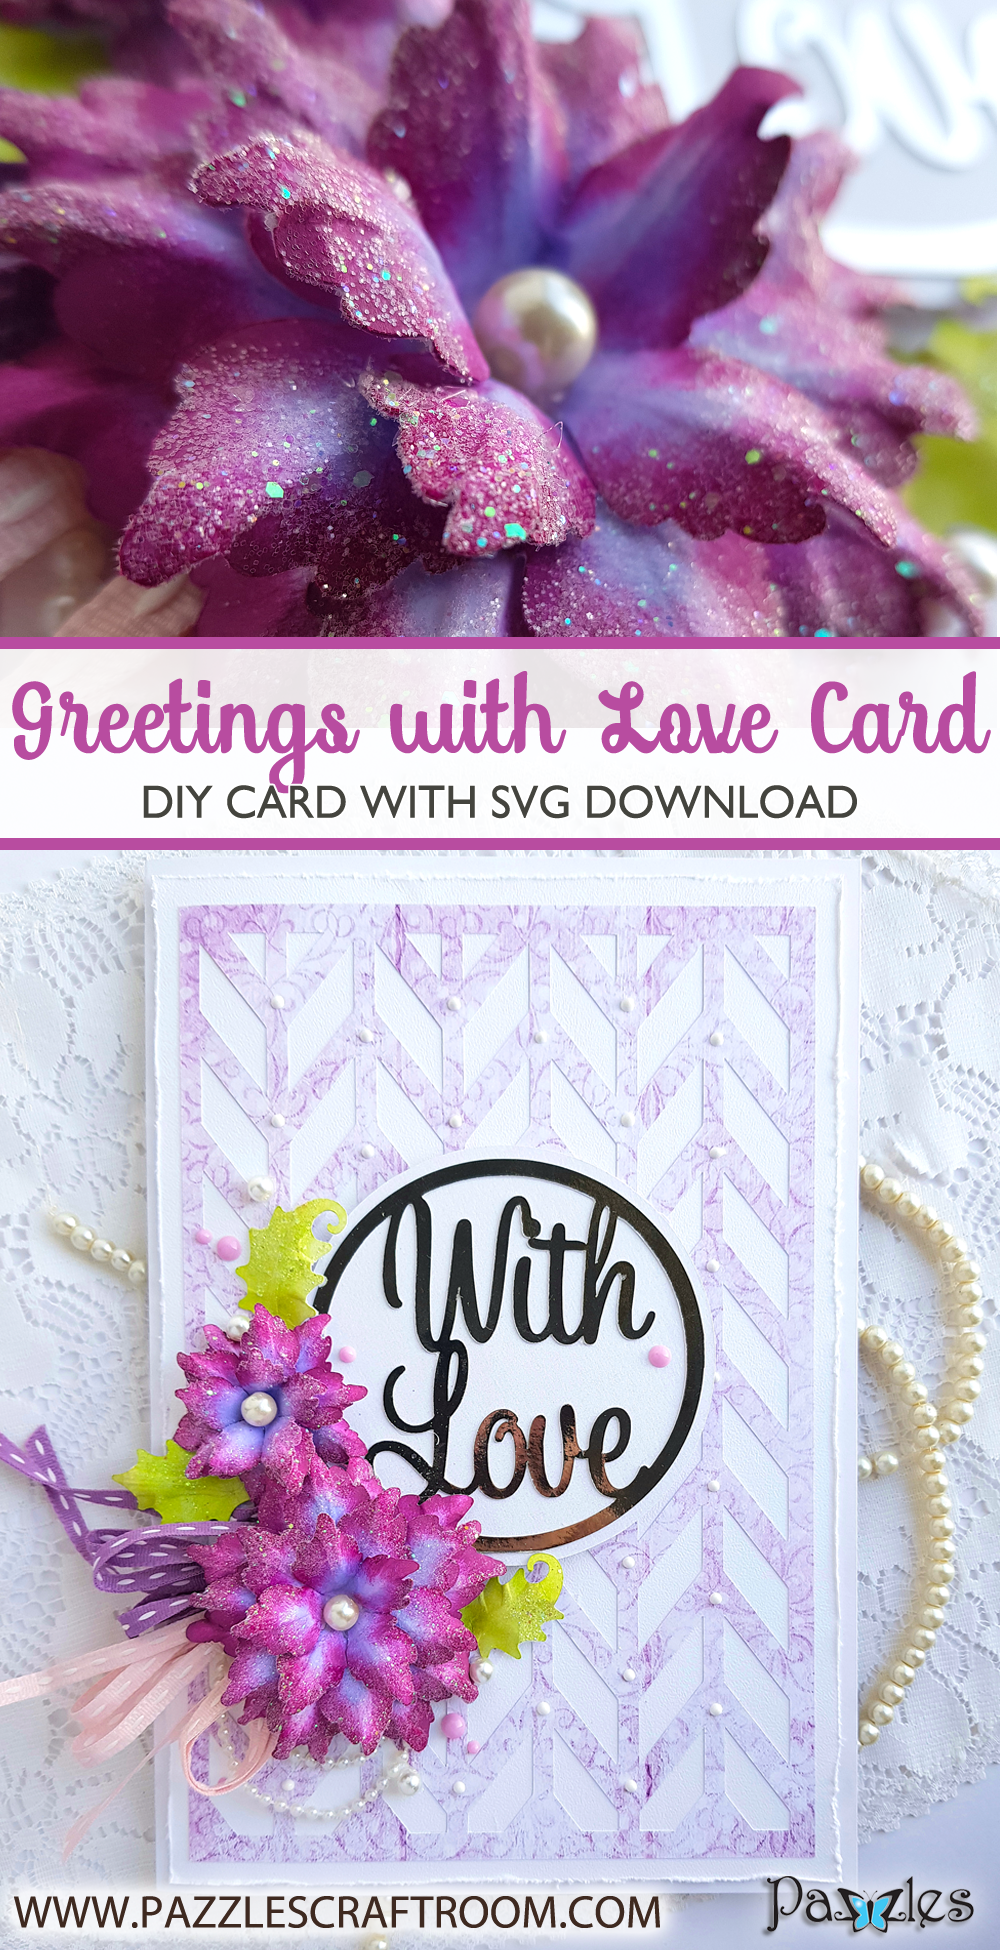 Pazzles DIY Greetings With Love Card with paper flowers. SVG download compatible with all major electronic cutters including Pazzles Inspiration, Cricut, and SIlhouette Cameo. Design by Nida Tanweer.